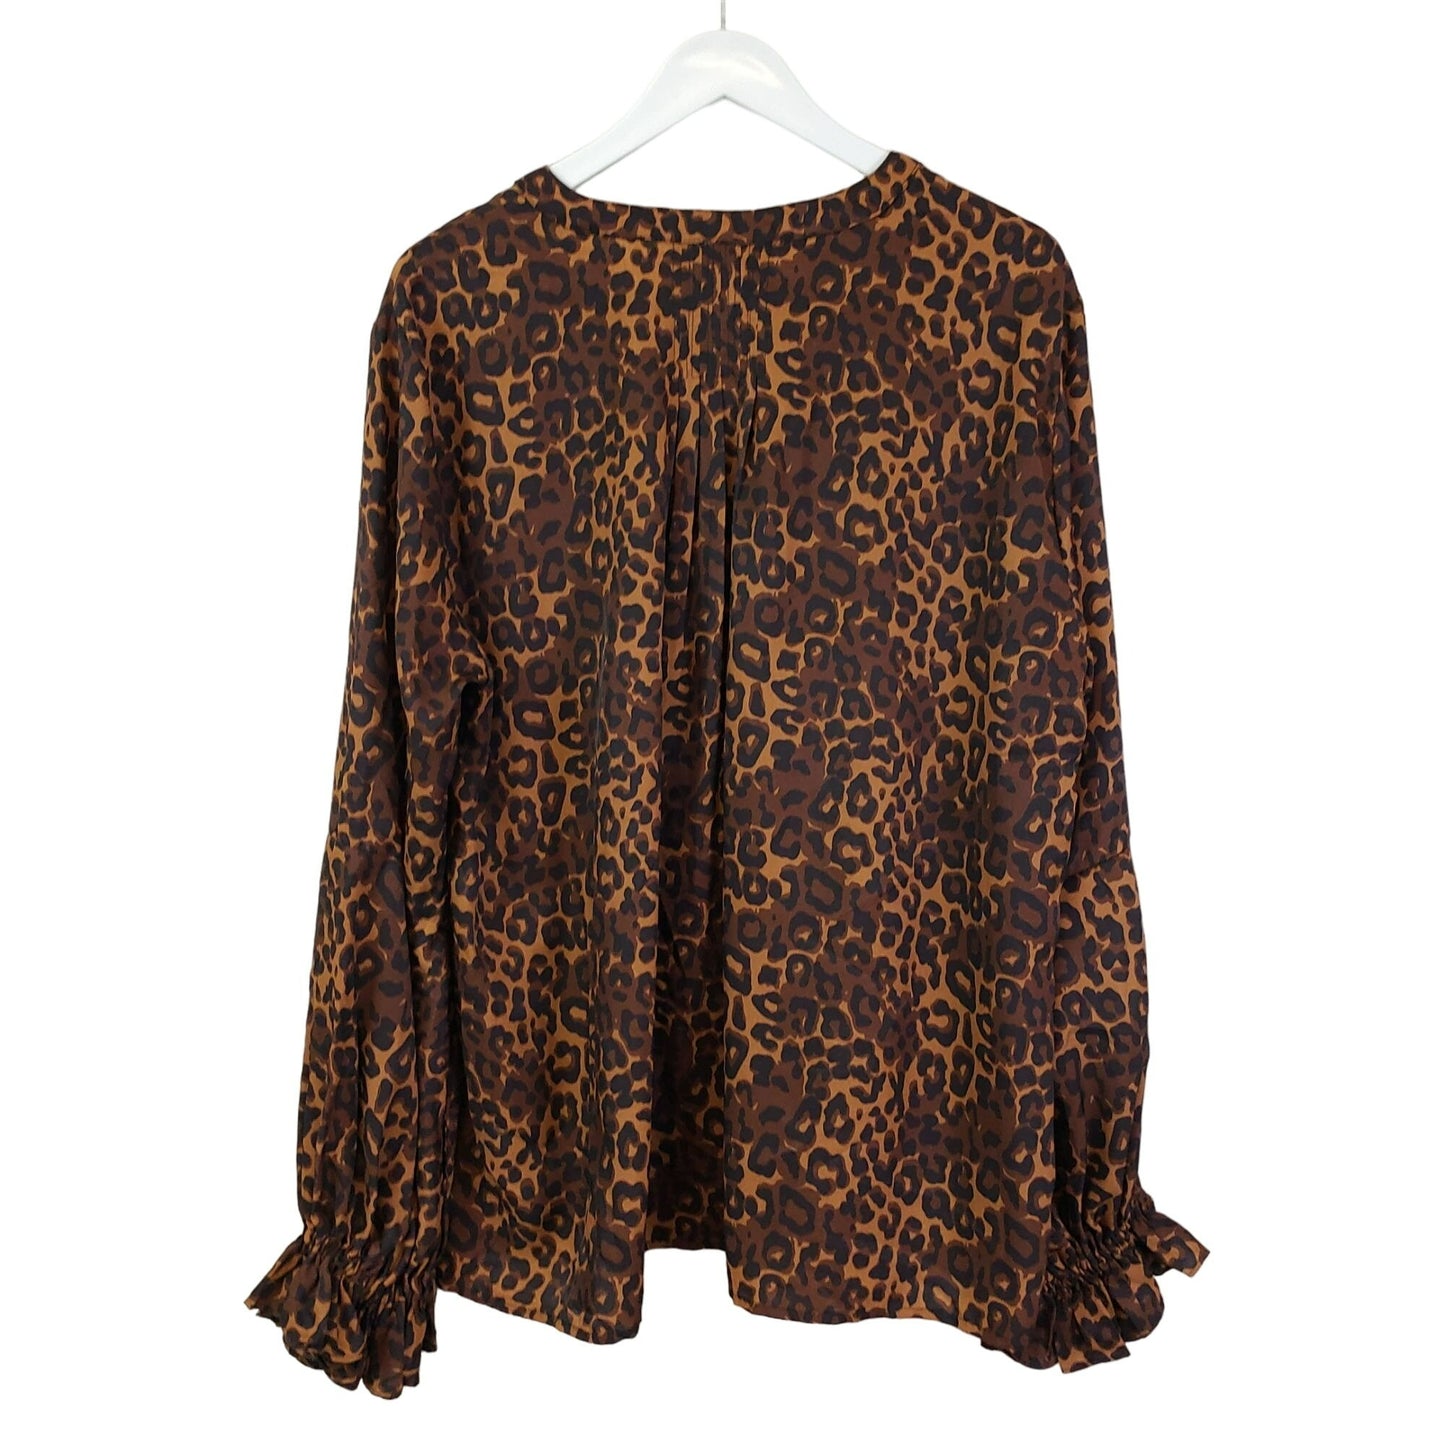 Flawless Leopard Print Balloon Sleeve Popover Top Size 2XL